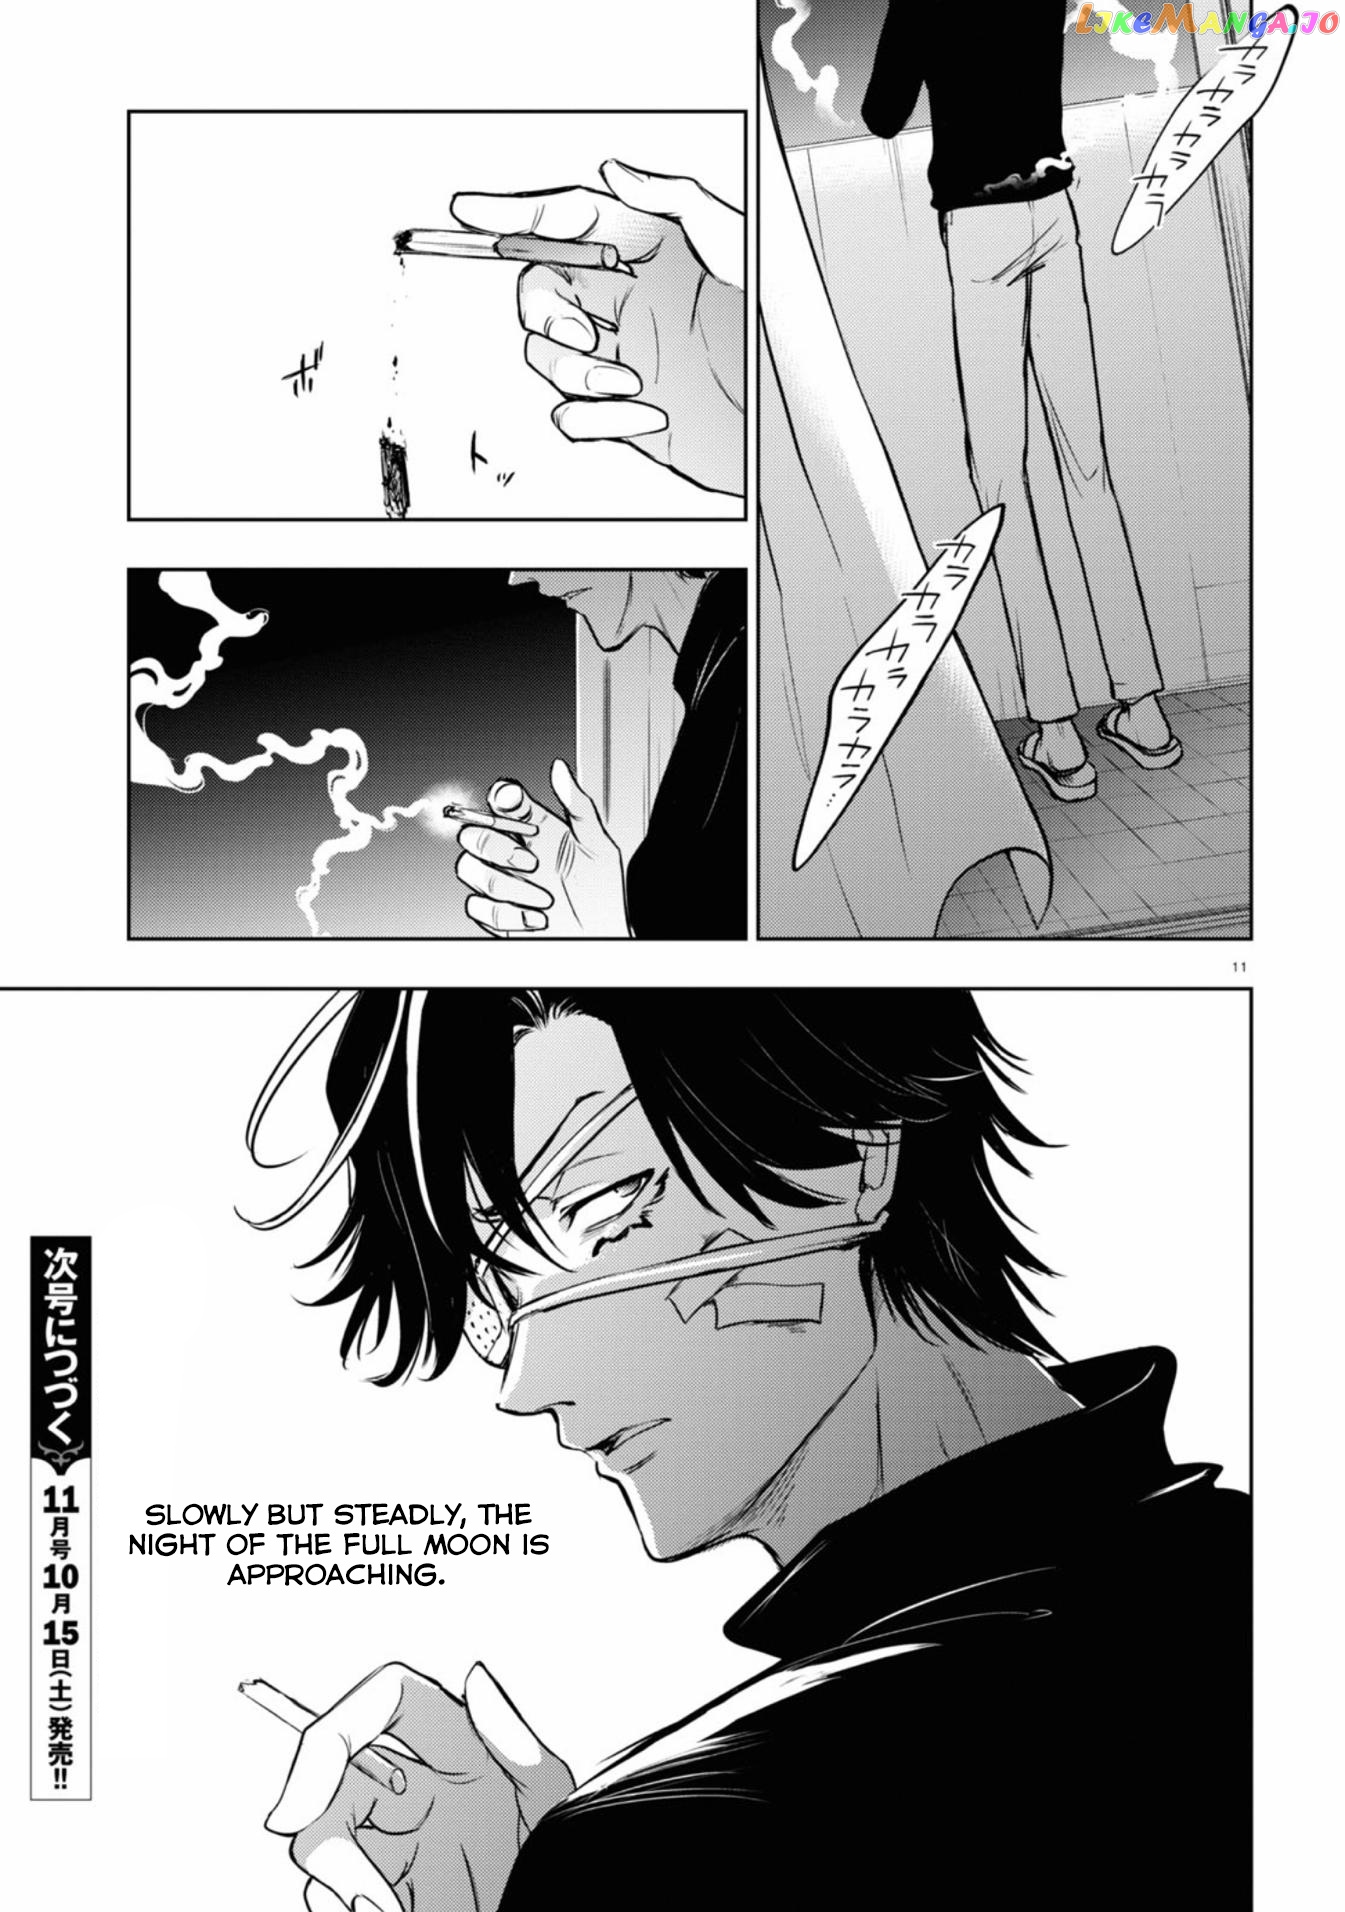 Servamp chapter 122 - page 11